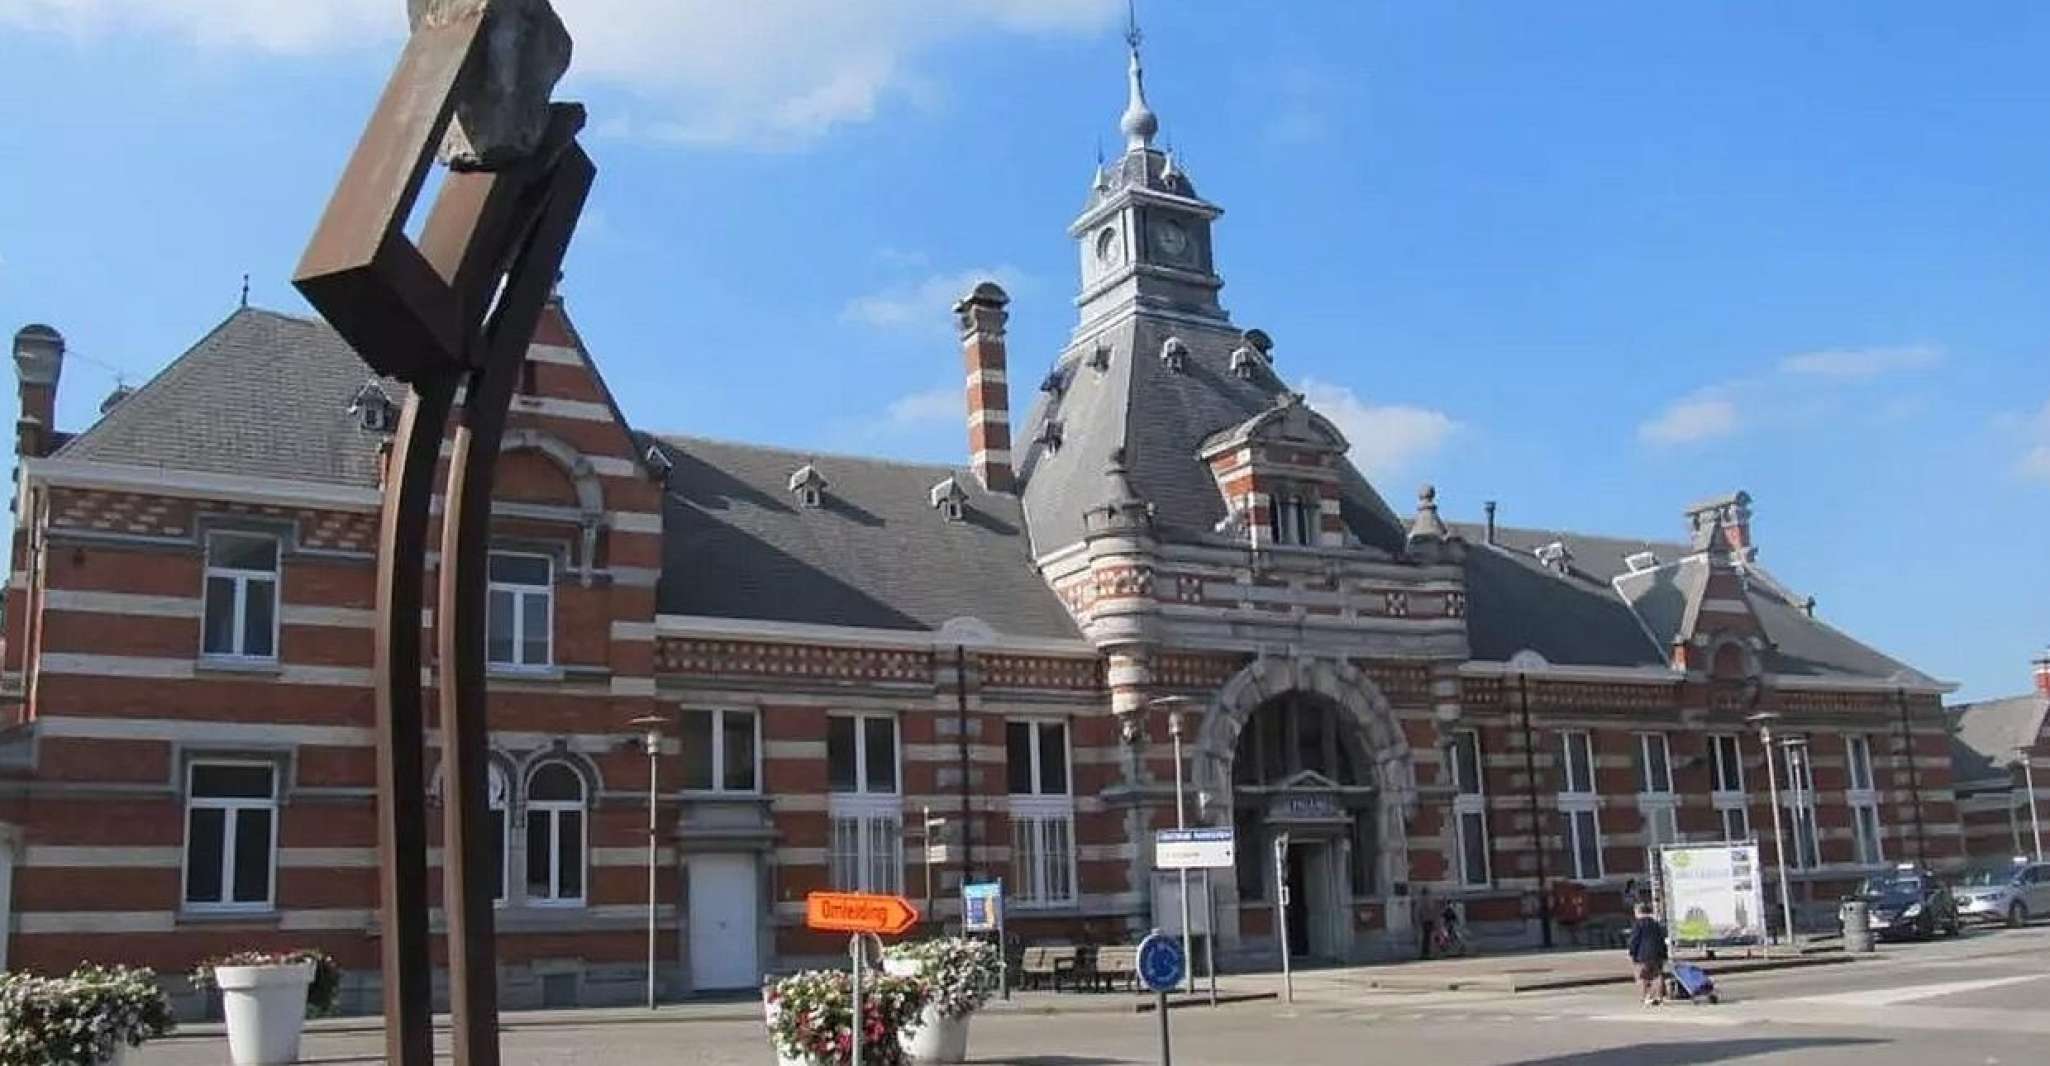 e-Scavenger hunt, explore Turnhout at your own pace - Housity